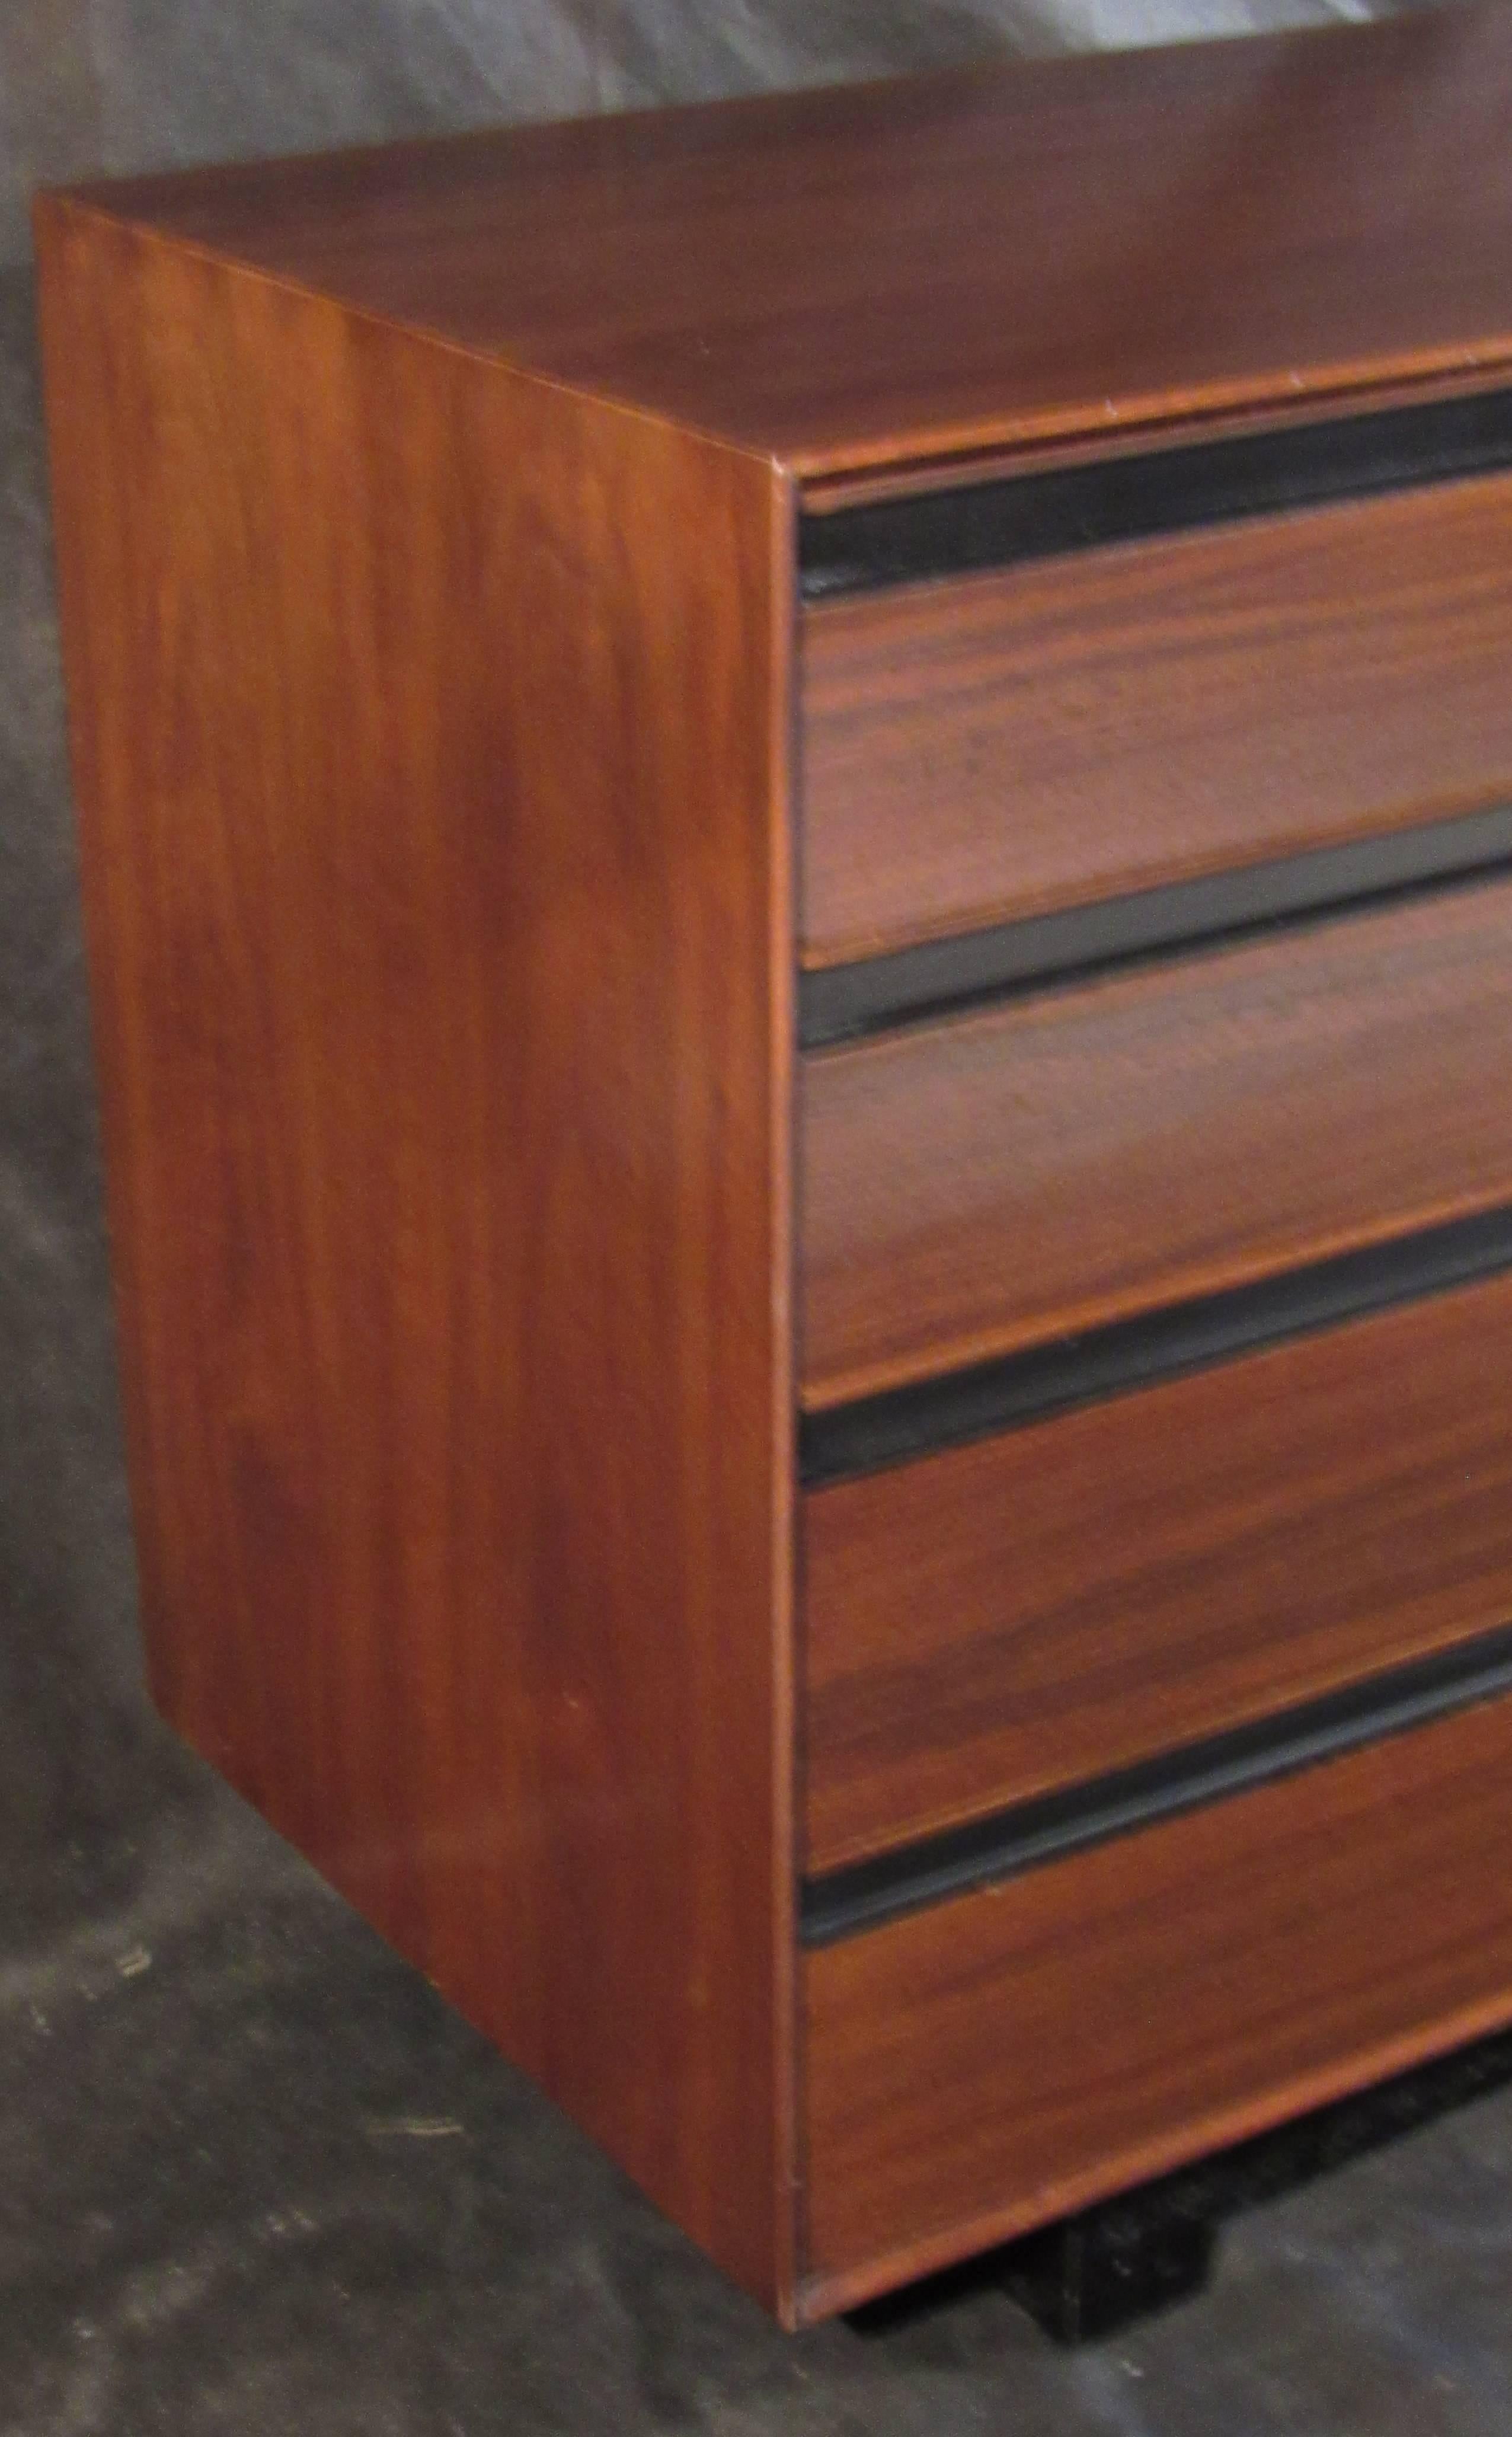 A black walnut eight-drawer dresser designed by John Kapel and manufactured by Glenn of California that features exceptional grain, sculpted pulls with black Lucite trim details that combine in a sophisticated design. Professionally restored in